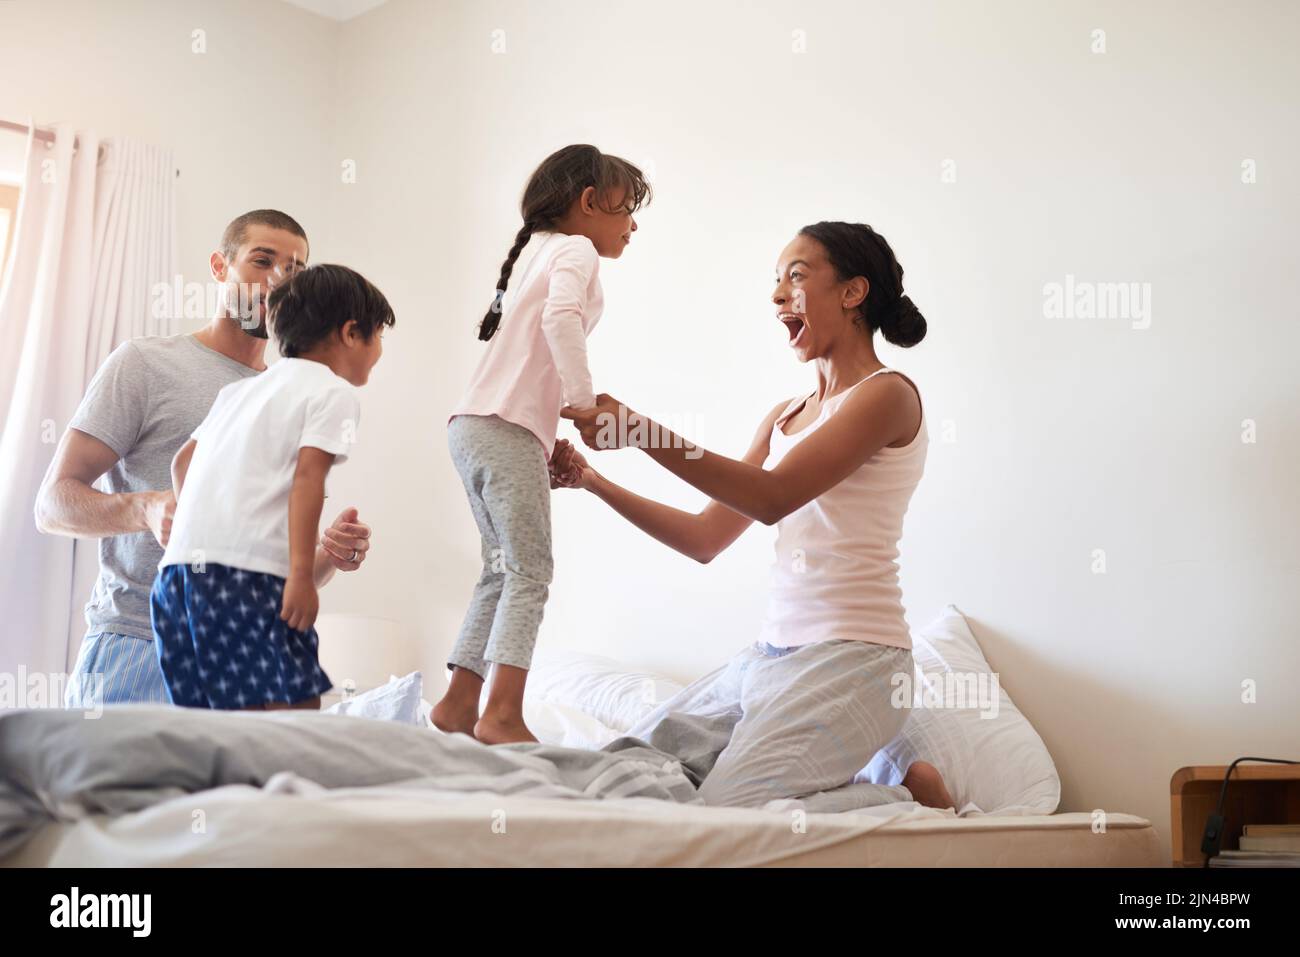 Family always comes first. a beautiful young family of four having fun and spending time together in their bedroom at home. Stock Photo